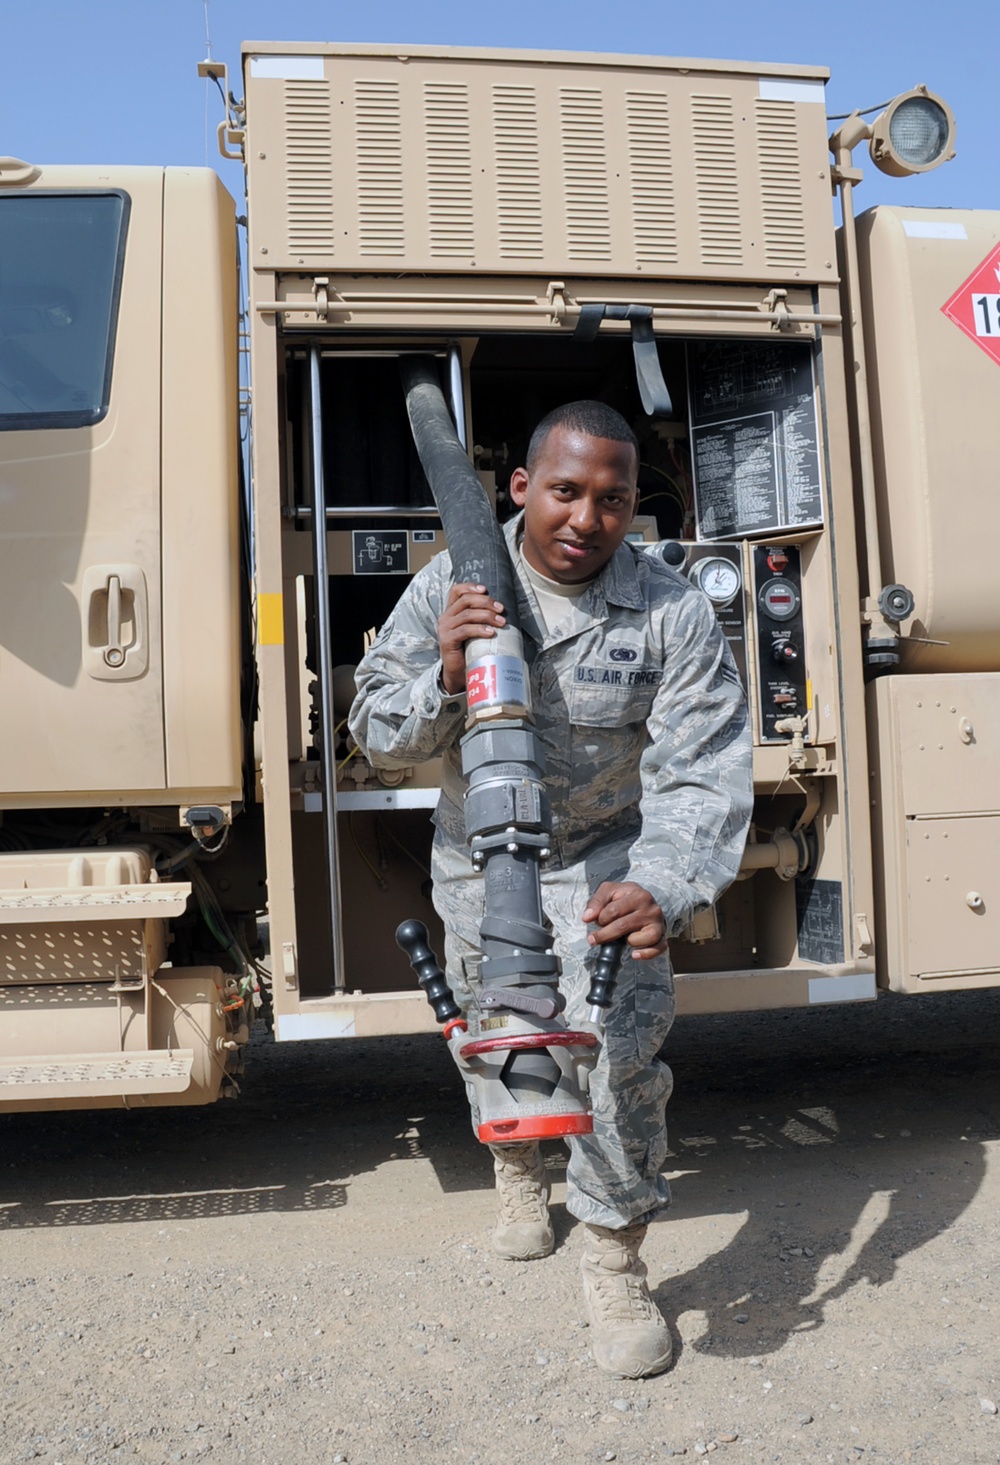 R-11's, R-12's, Refueling: Mildenhall Fuels Airman, Harrisonburg Native, Gets the Fuel to the Fight